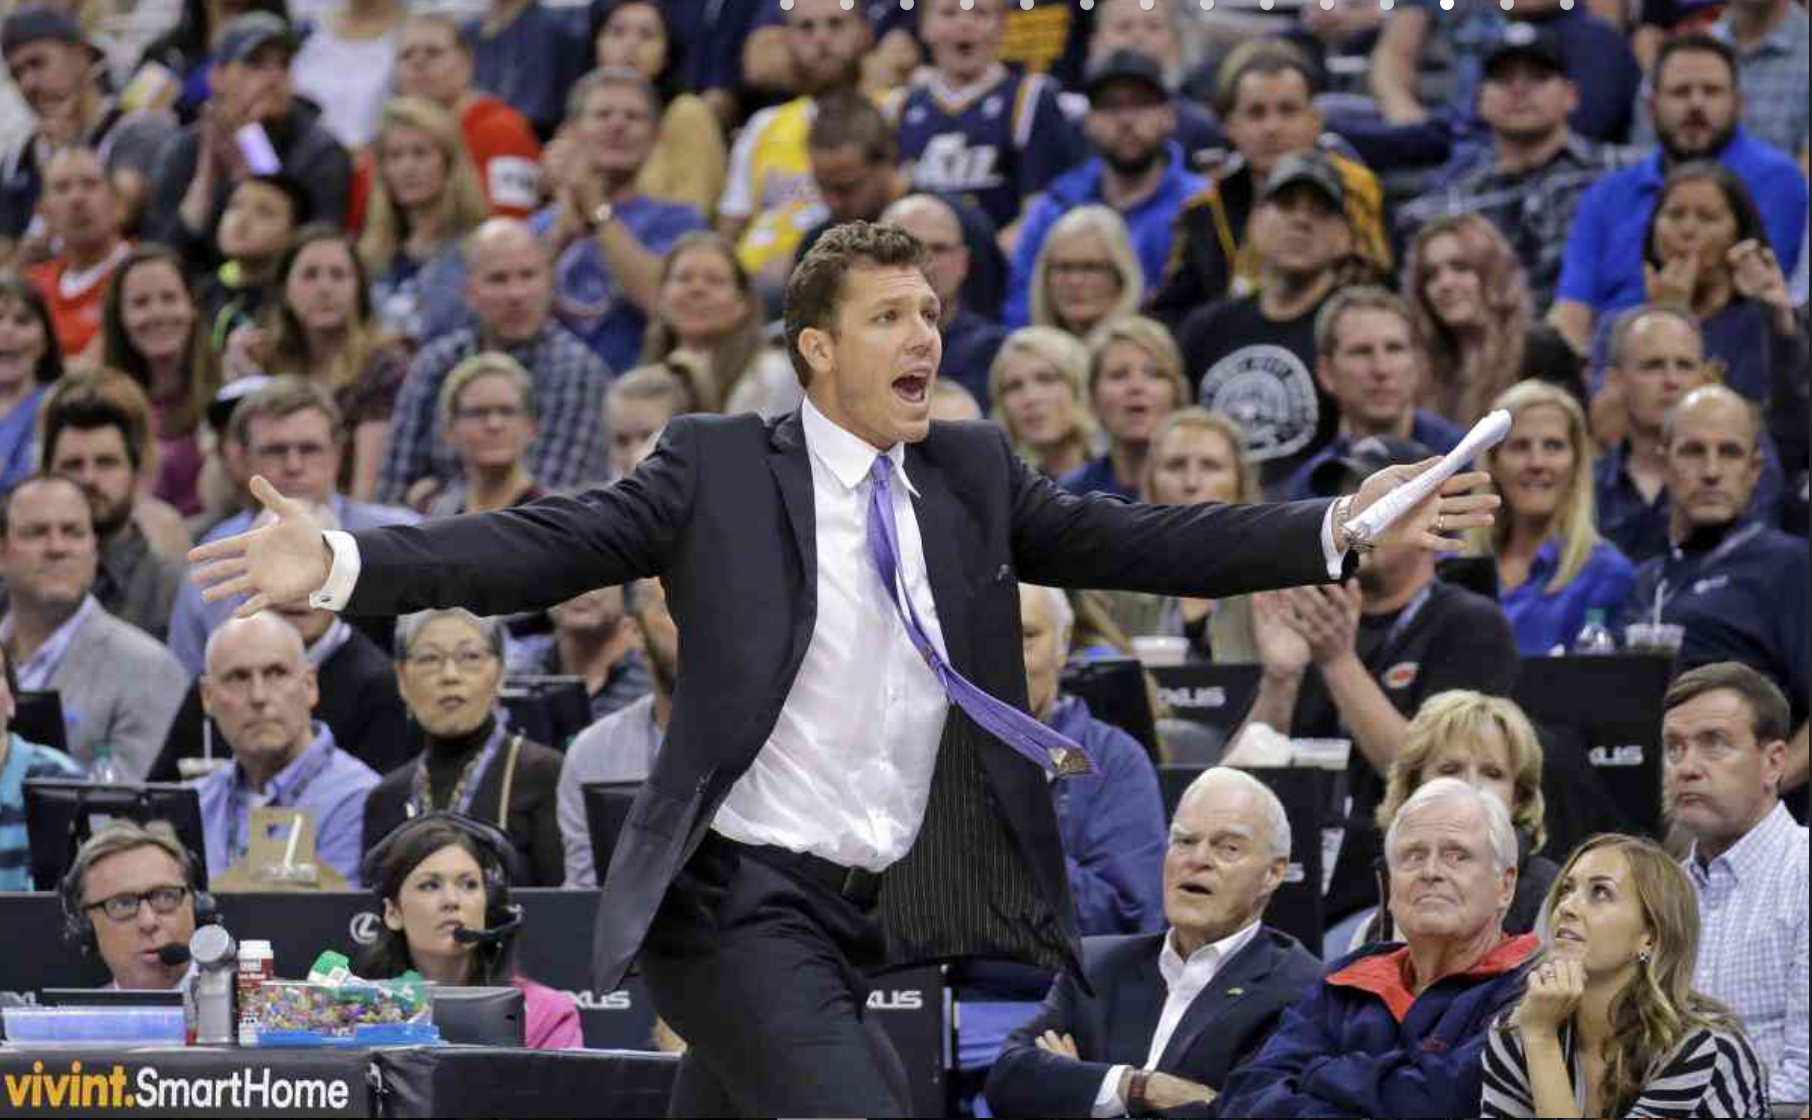 Lakers coach Luke Walton reacts to a call during the second half of his team's 96-89 loss to the Jazz on Friday night in Salt Lake City. AP Photo/Rick Bowmer